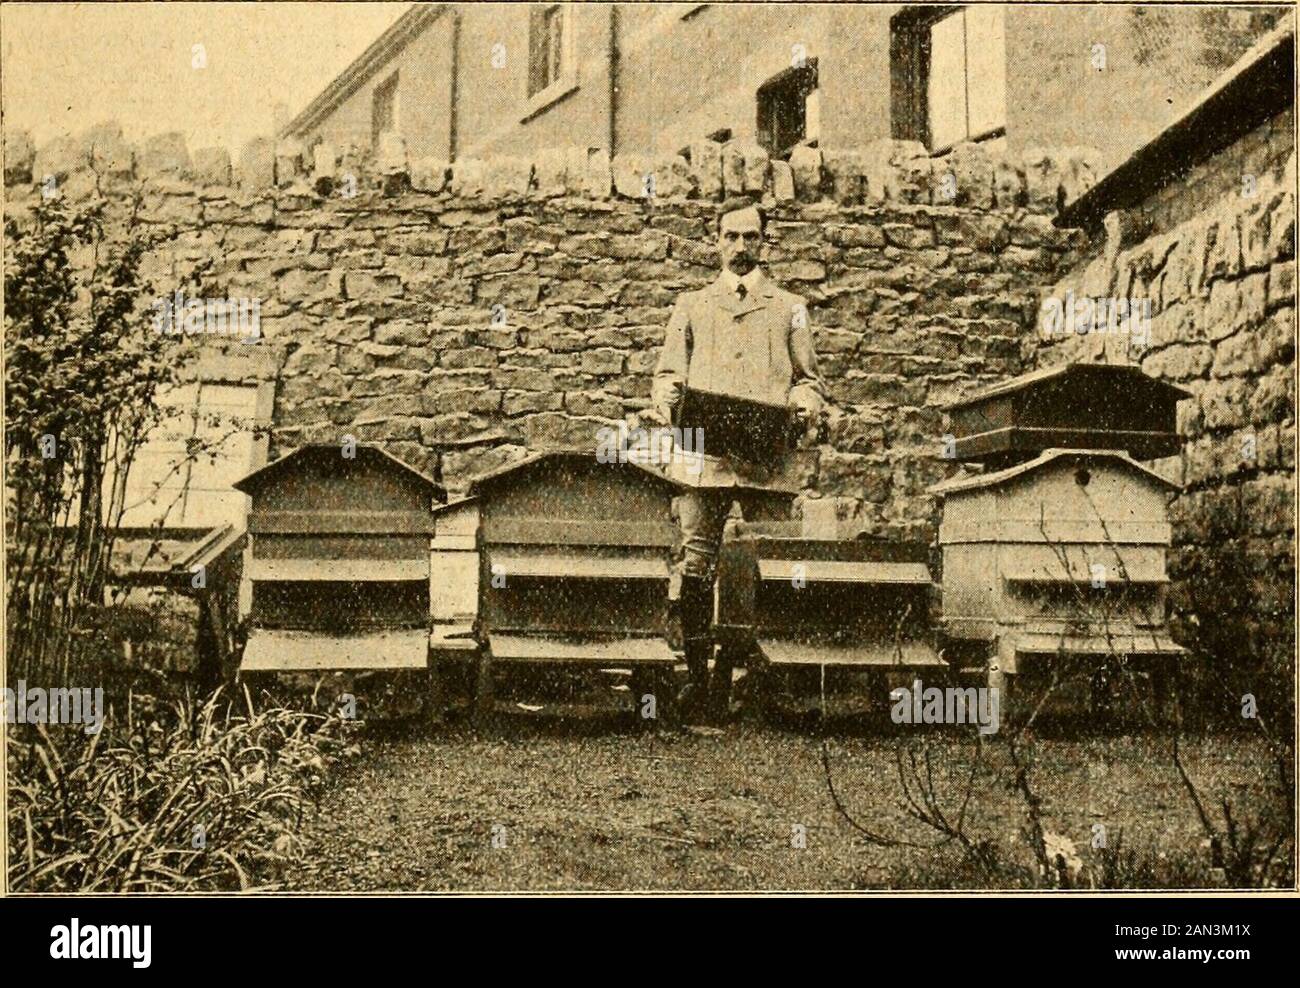 British bee journal & bee-keepers adviser . s of shallow-frames, they neverswarmed. It will be noticed that thehiveis are placed very close together, so inorder to give the bees a better chance ofdistinguishing their own domicile, No. 1is painted a jaale blue, No. 2 oak-grained,No. 3 green, and No. 4 red. The hive uncovered and showing feed-ing-bottle had a queen which did not com-mence to lay until three weeks after fer-tilisation in autumn, and then began with In 1903 I gained my third-class expertscertificate, and hope to go still higher,though I do not tliink the pi-esent expertvisiting sy Stock Photo